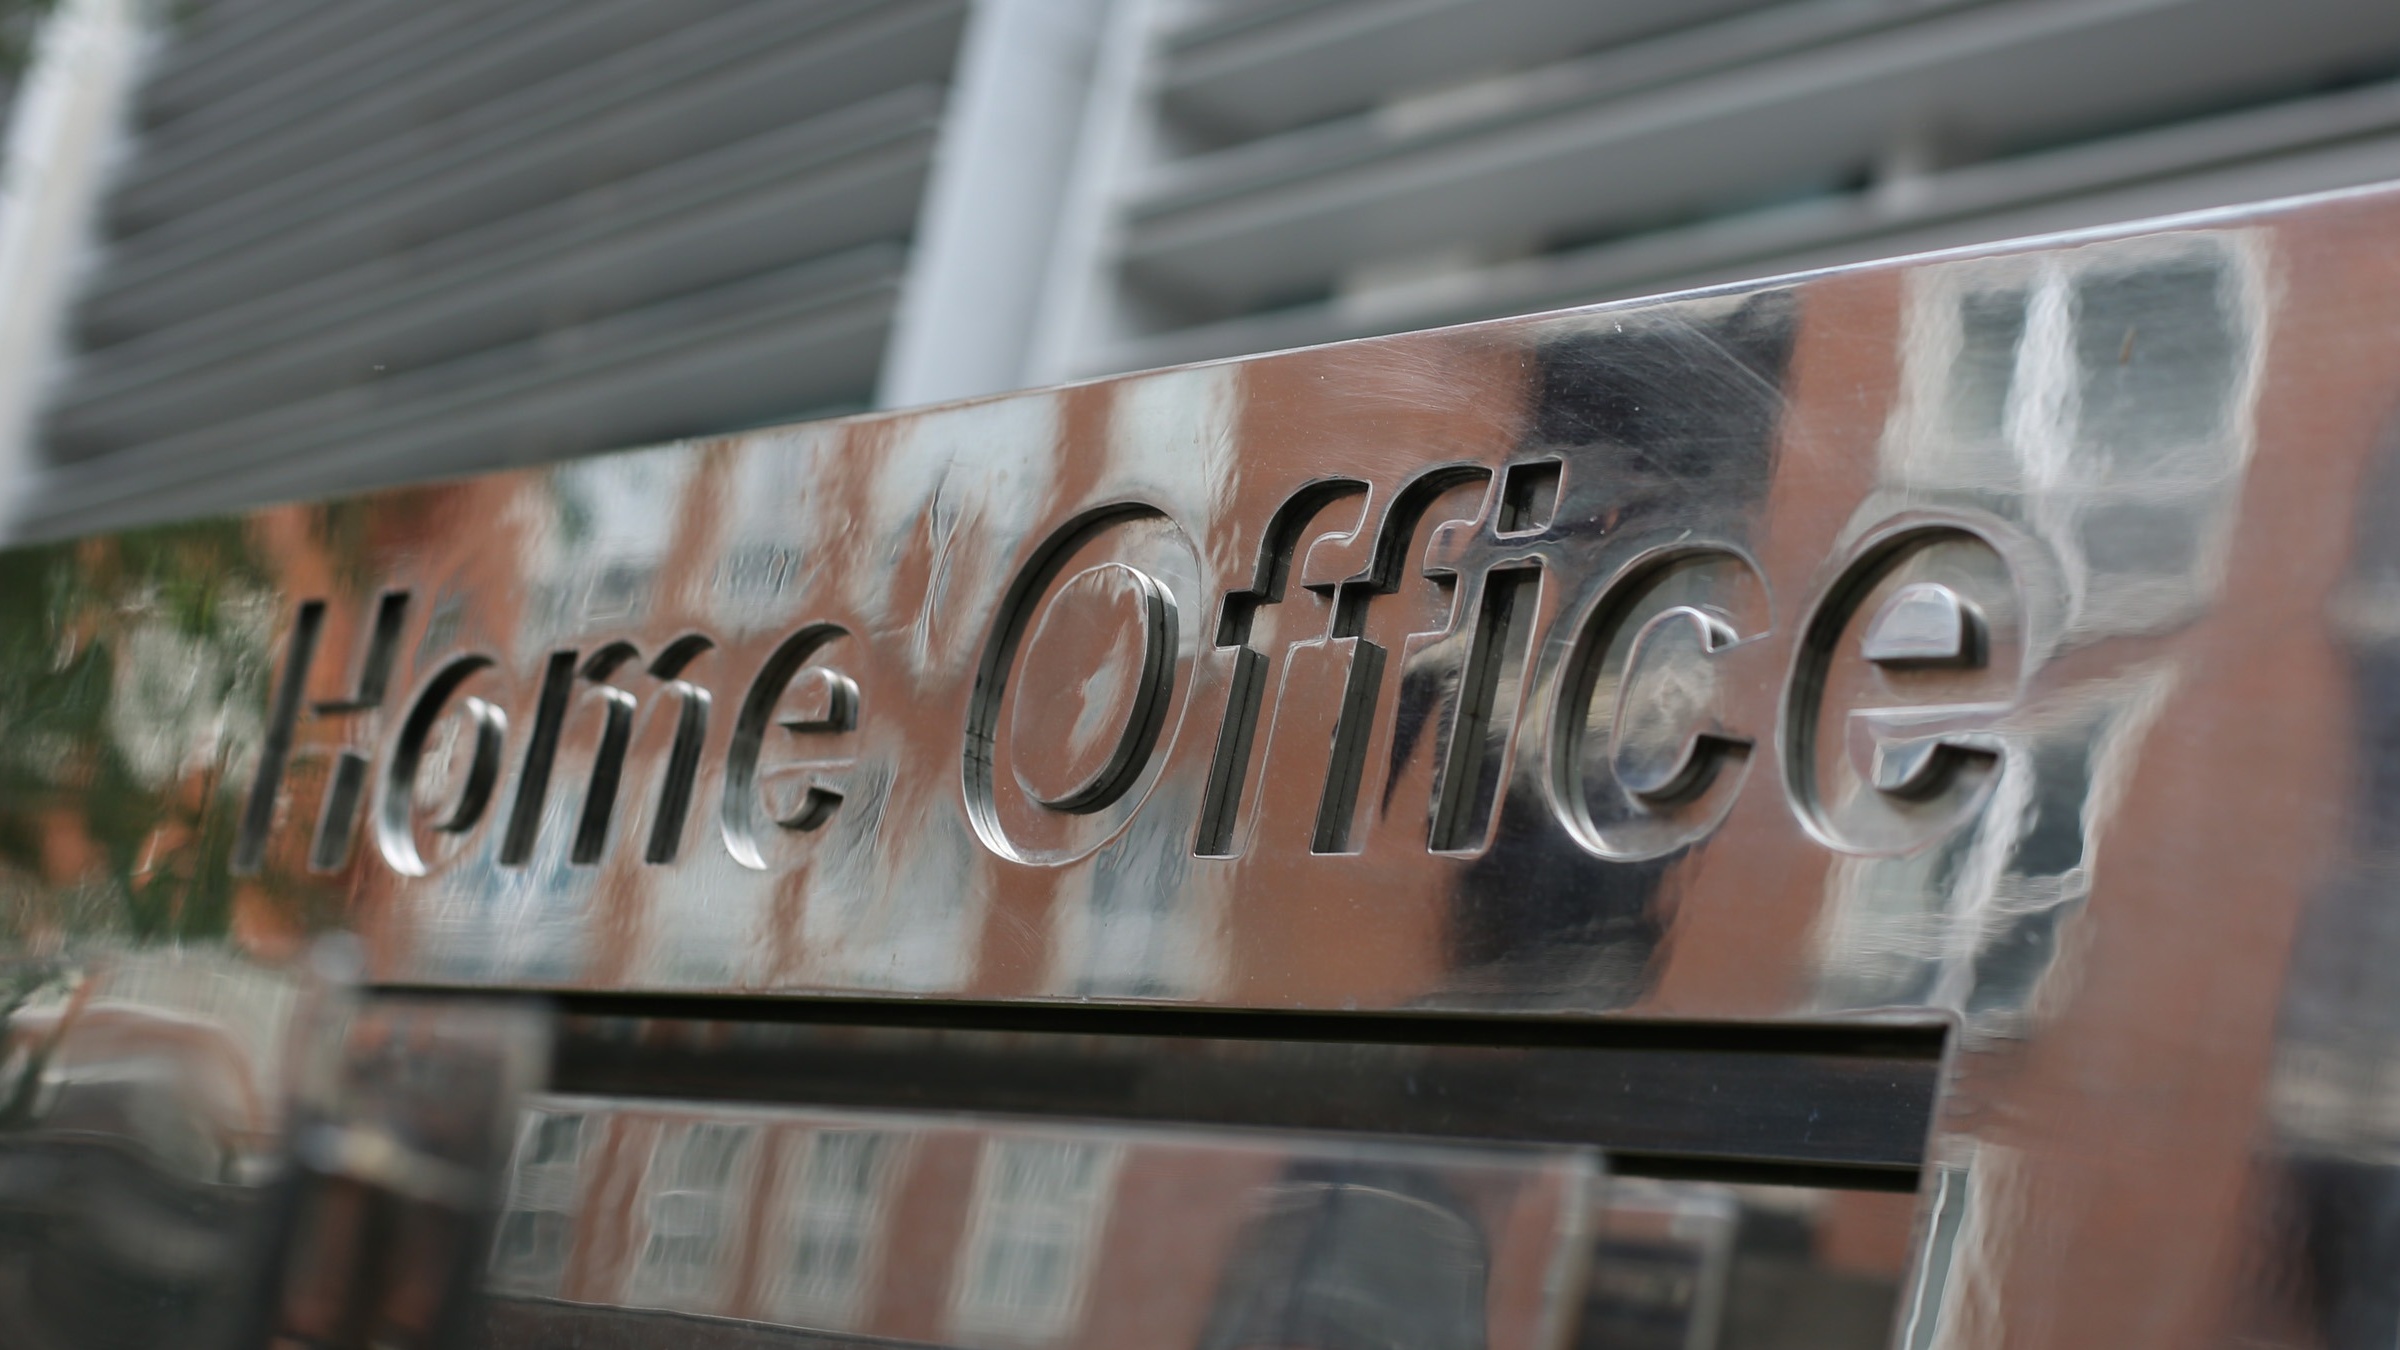 Signage for the Home Office in Westminster